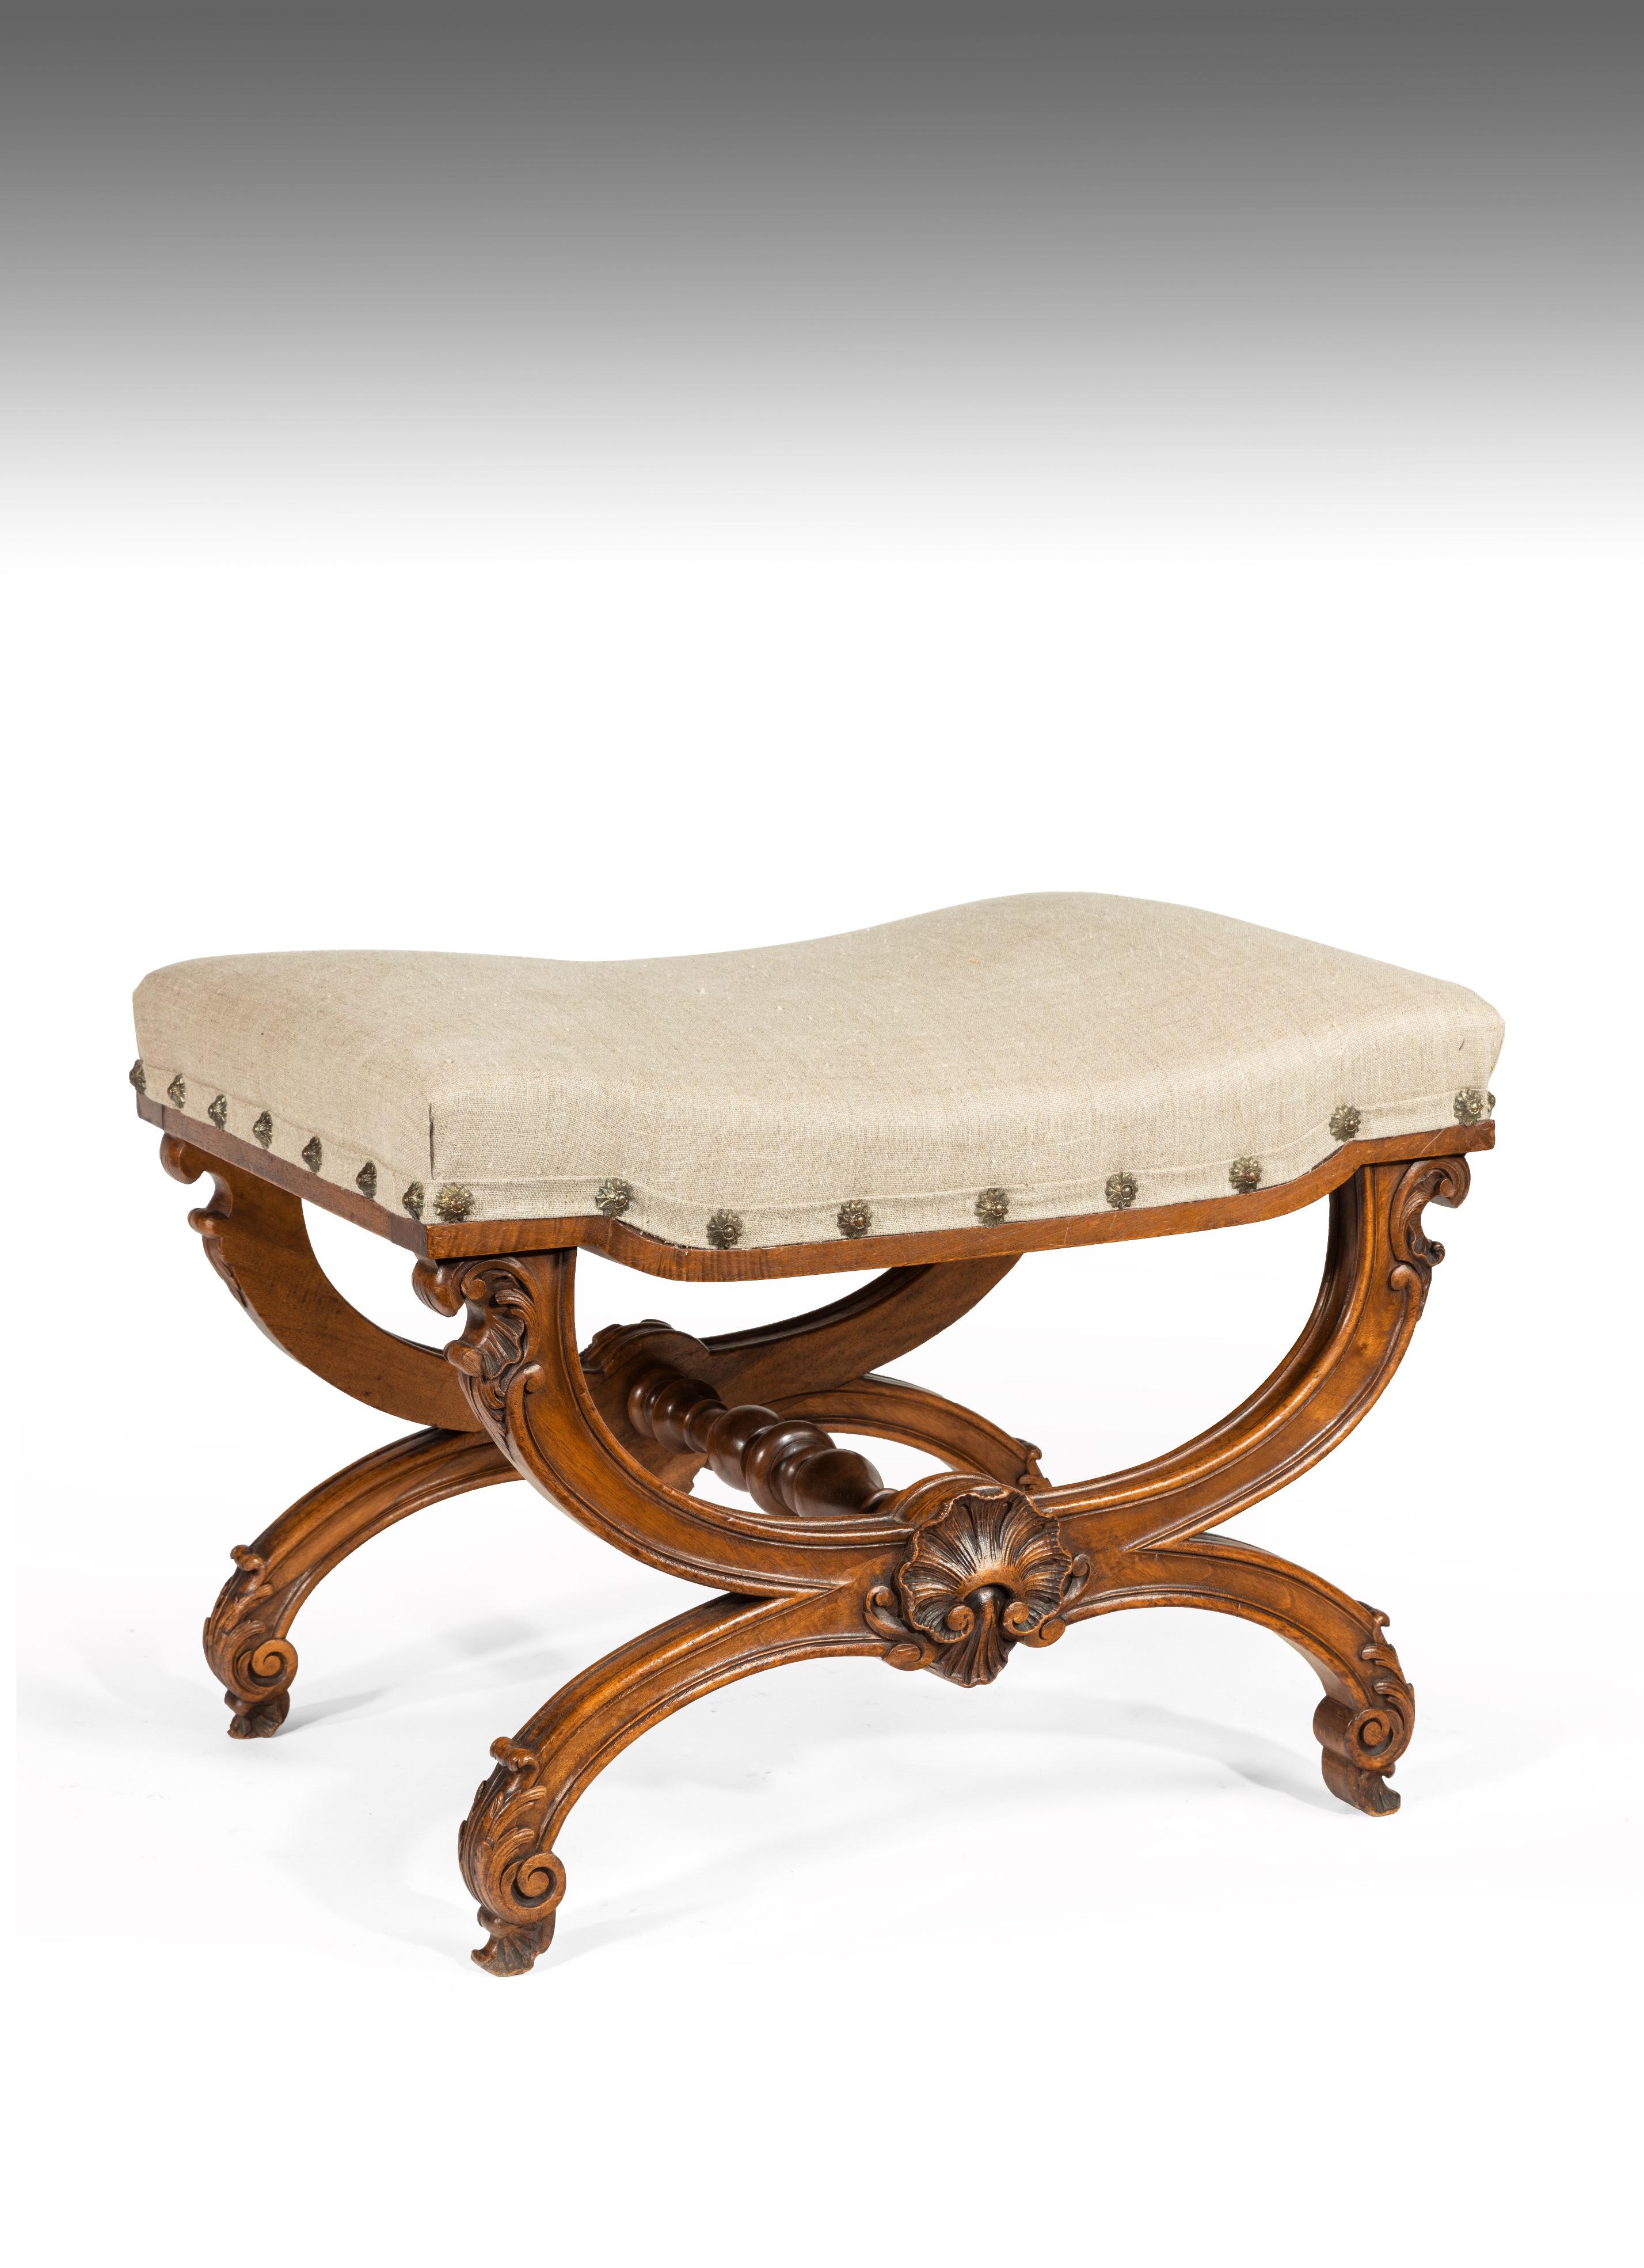 A good quality late 19th century walnut curule stool / x frame stool covered in linen.

French circa 1860-1880

Of excellent form, the shaped saddle seat having been recently recovered in a neutral linen fabric whilst retaining the original